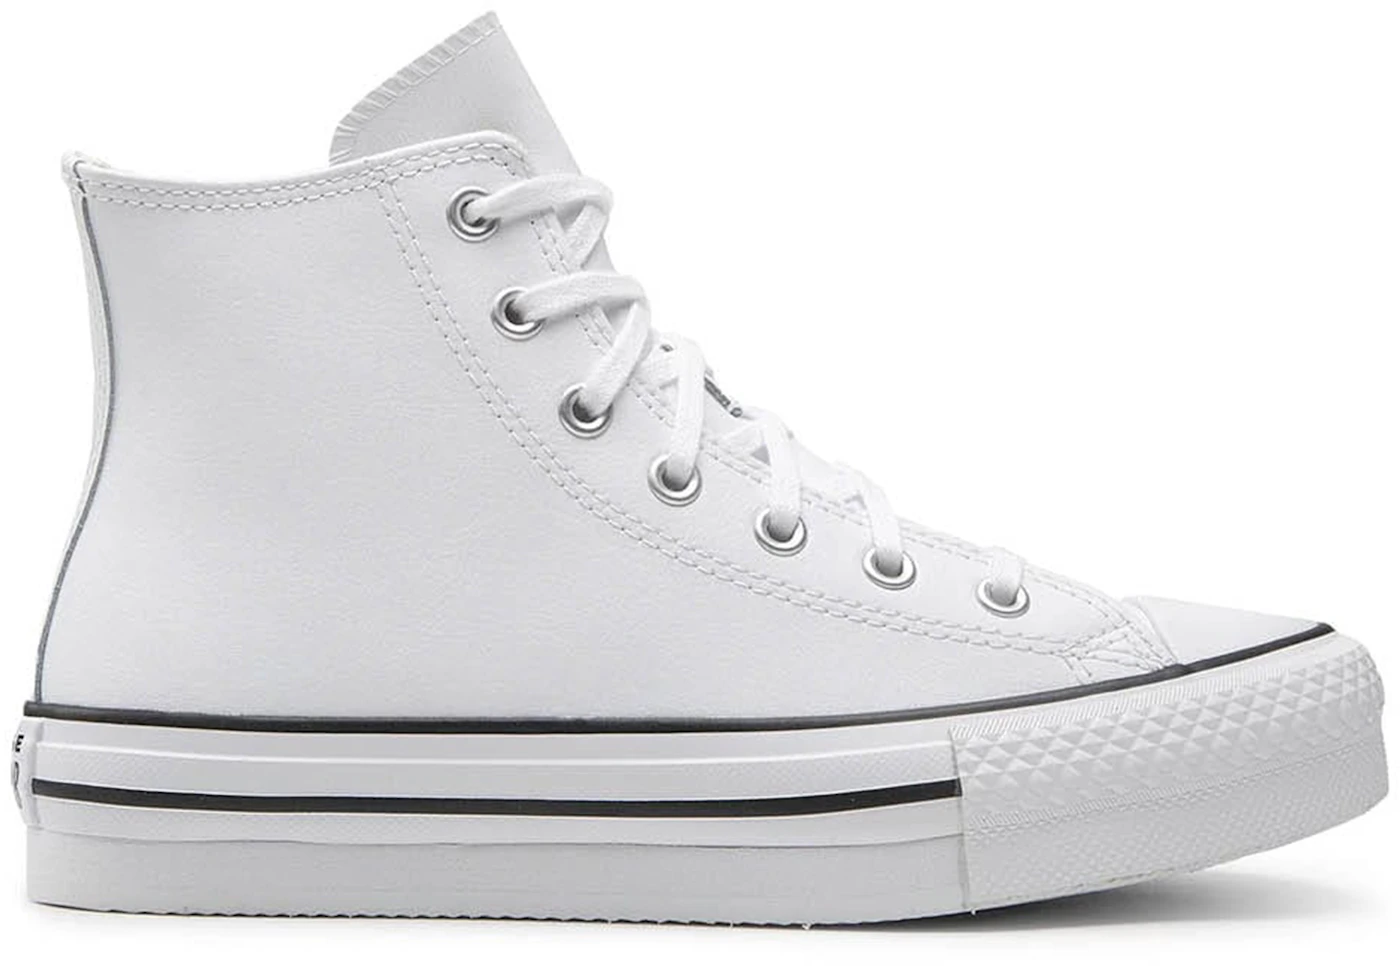 Taylor Natural Leather All - White Ivory A02486C Hi Chuck Star Converse Lift Eva US -